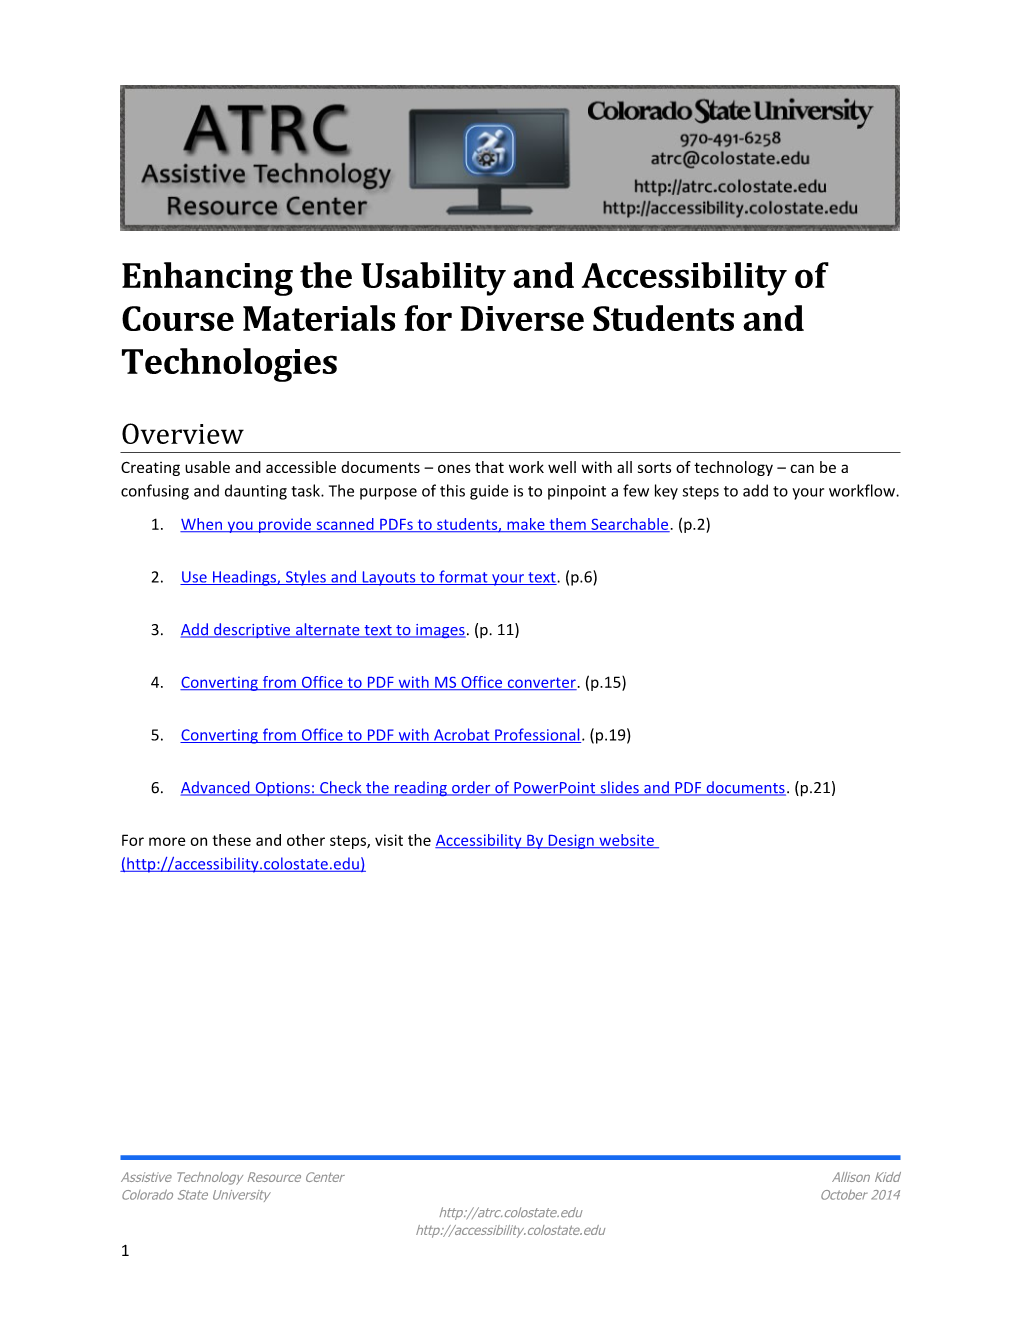 Enhancing the Usability and Accessibility of Course Materials for Diverse Students And